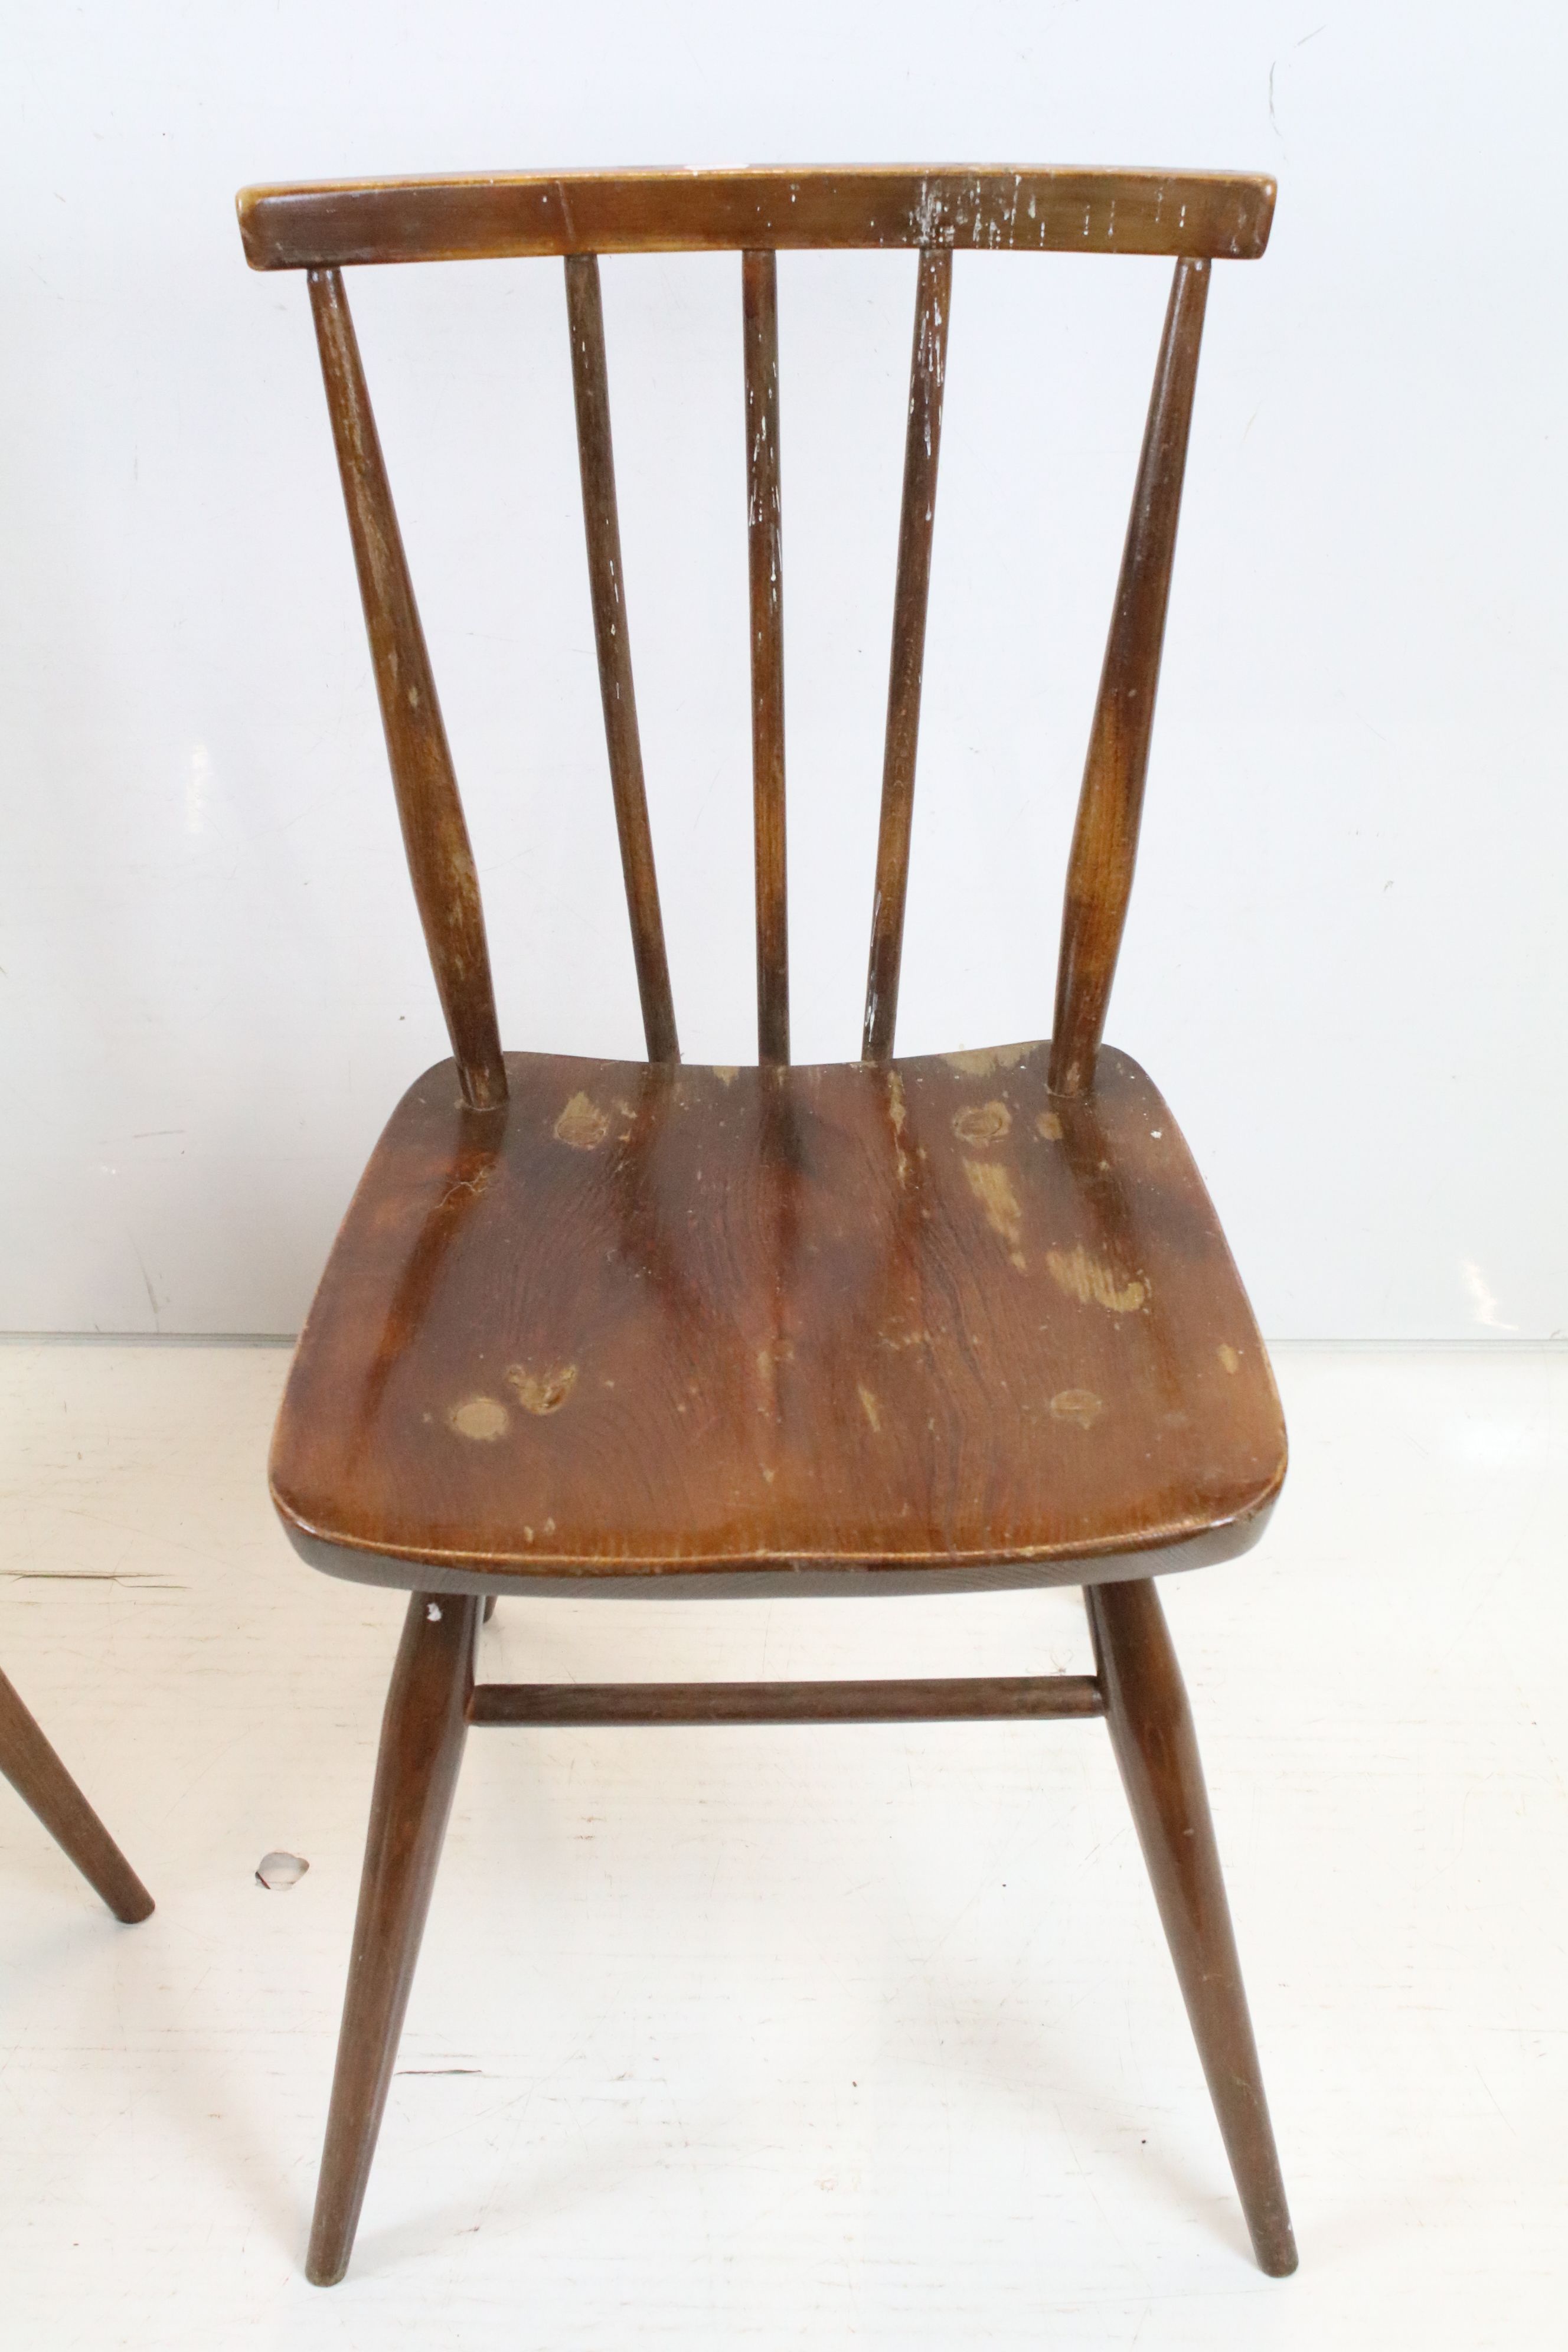 Set of Four Ercol Elm and Beech Dining Chairs, model 391, each chair 77cm high x 40cm wide - Image 3 of 5